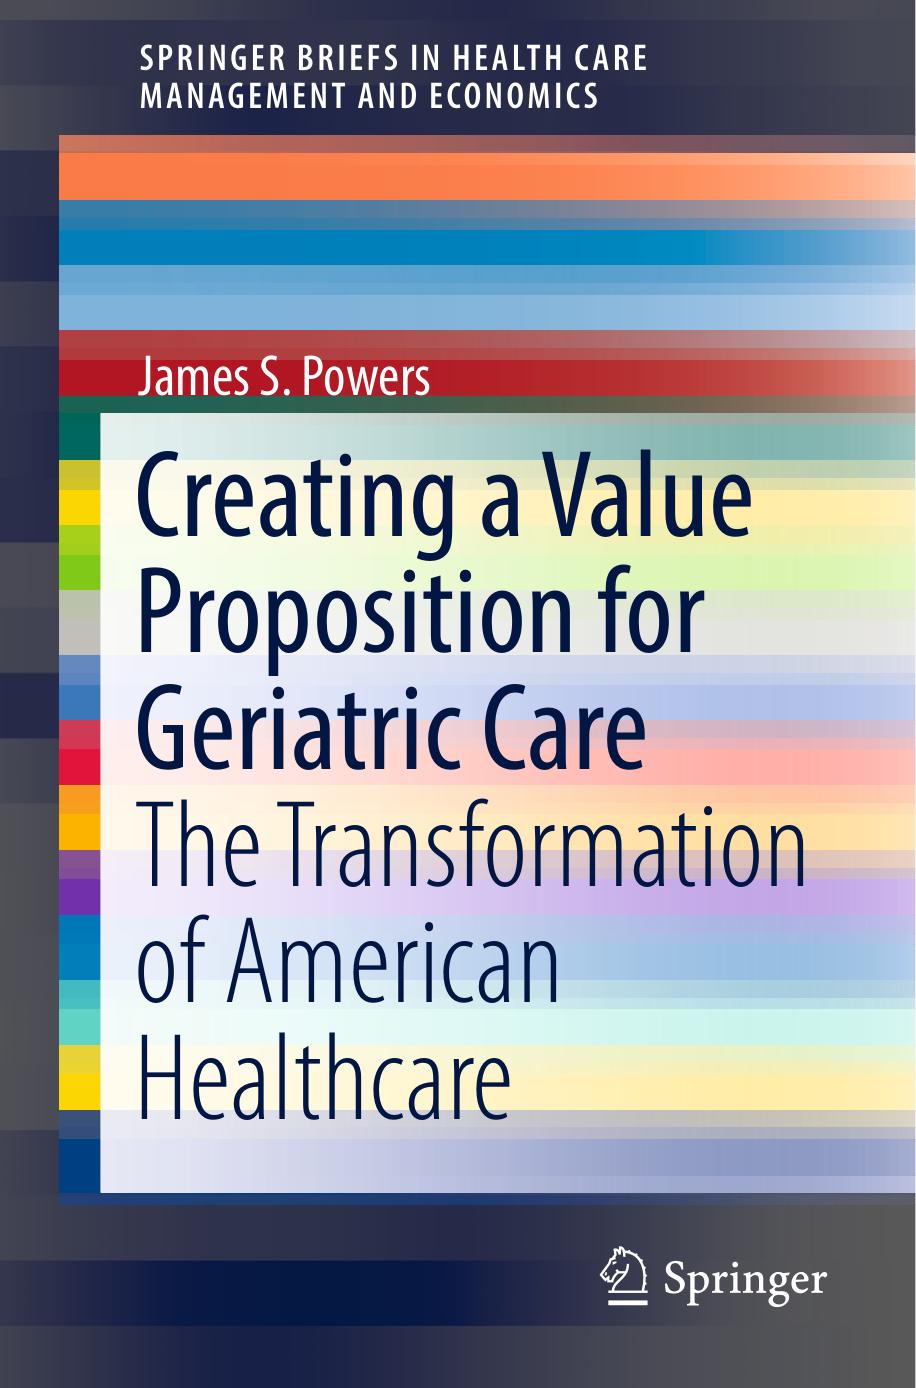 Creating a value proposition for geriatric care   the transformation of American healthcare (2018)